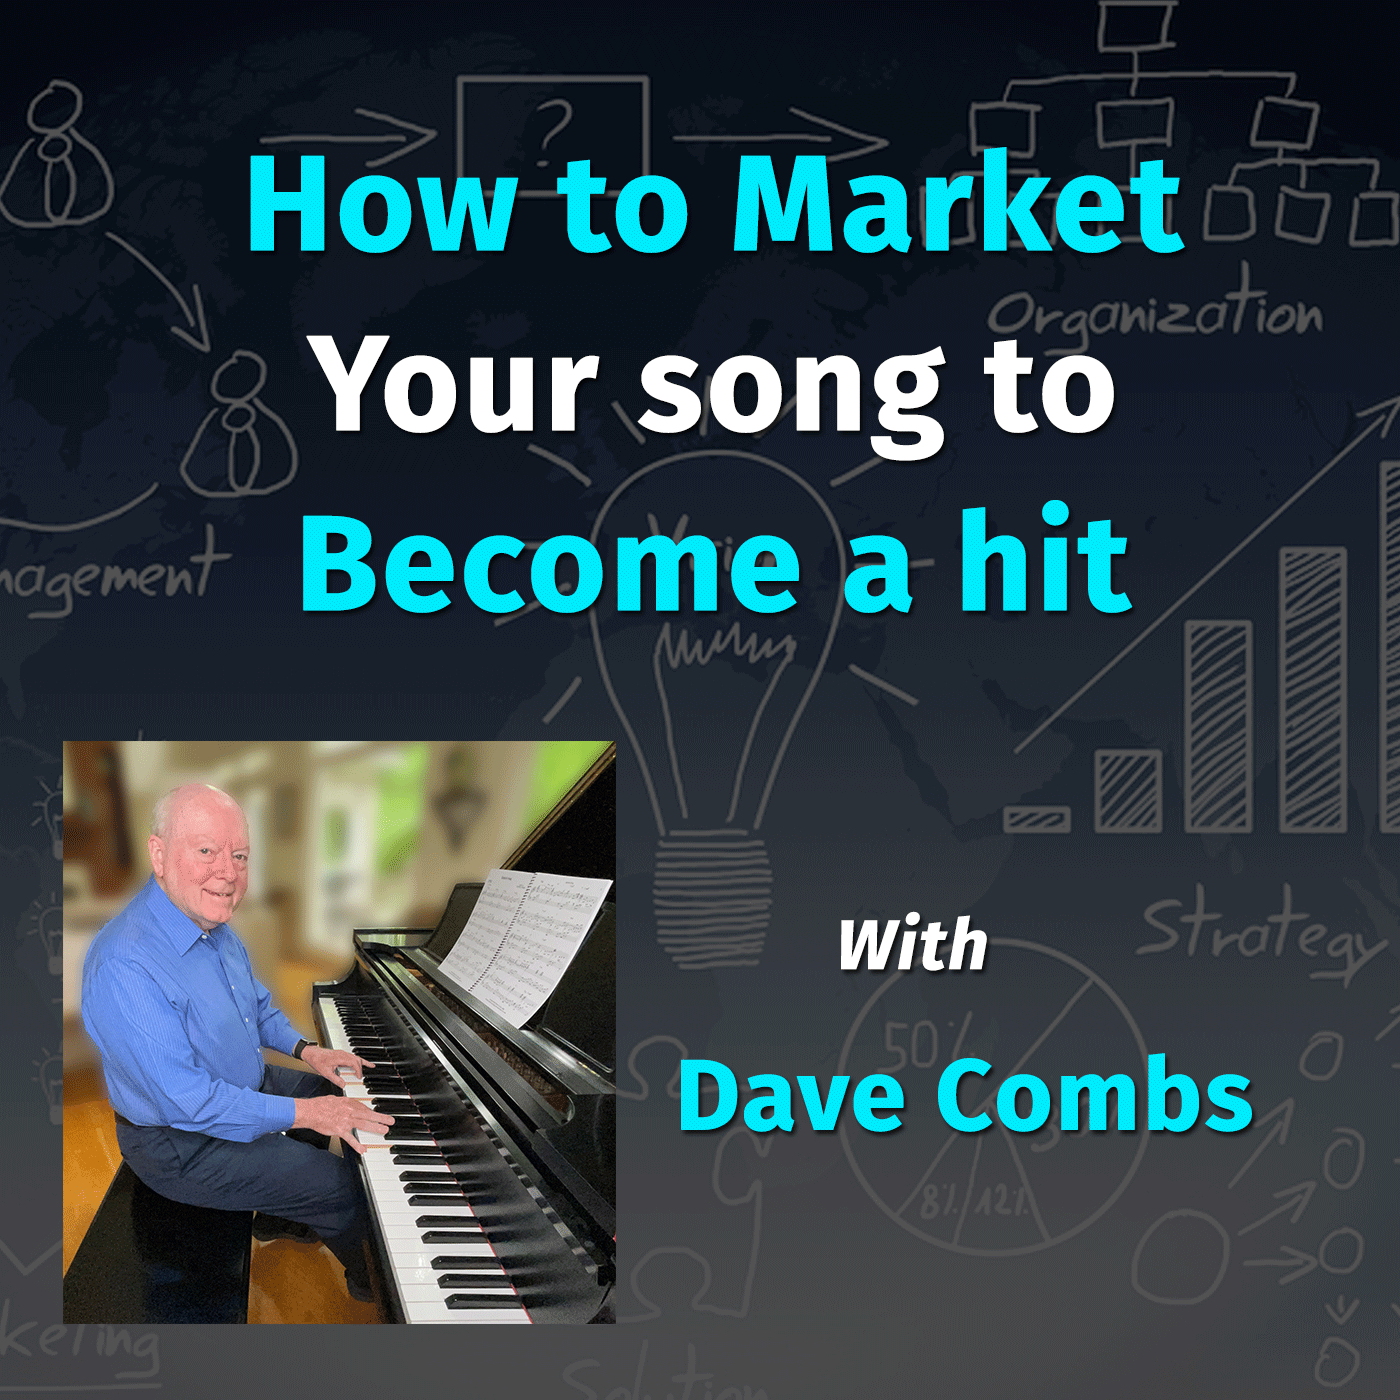 How to market your song to become a hit with Dave Combs